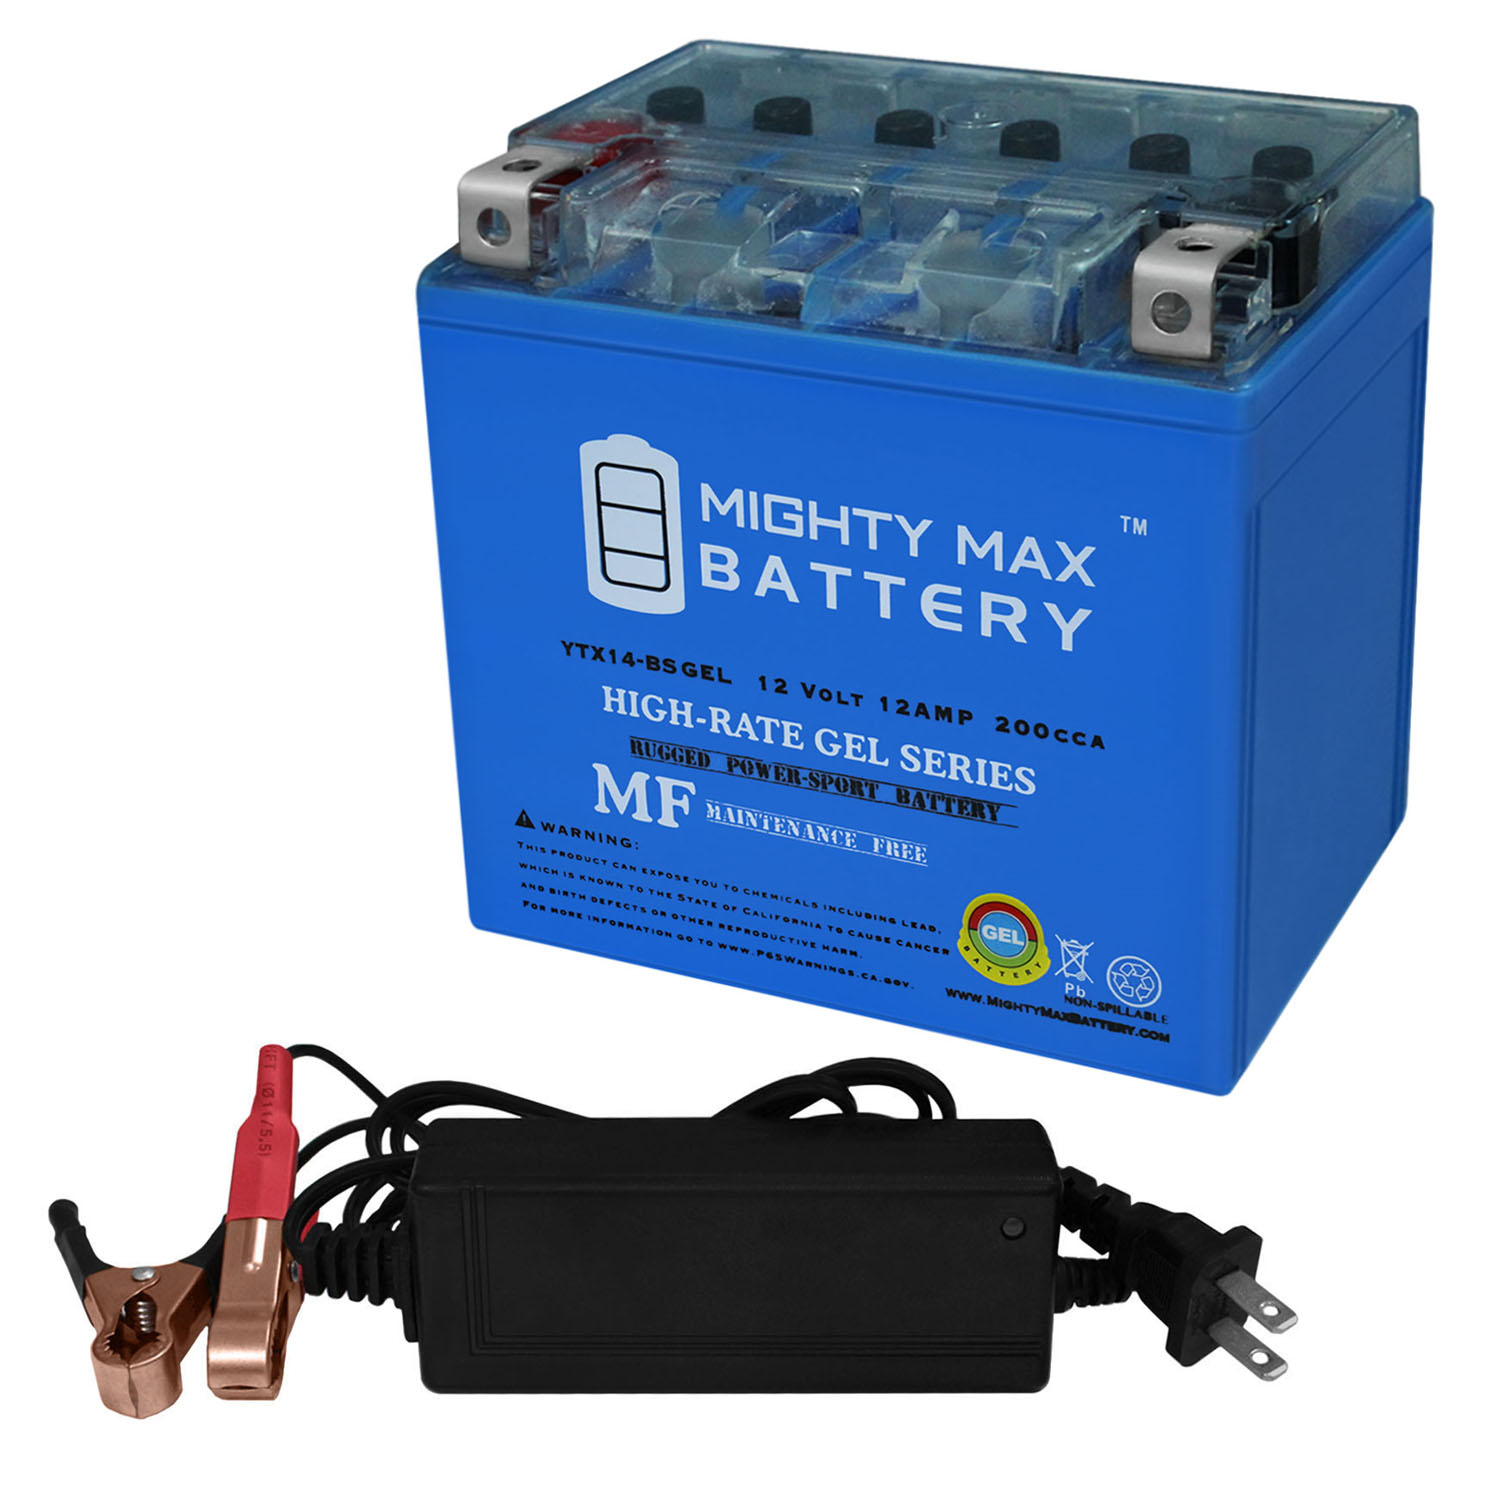 Mighty Max Battery YTX14-BS GEL Battery for Ducati 1098 2007 + 12V 2Amp Charger